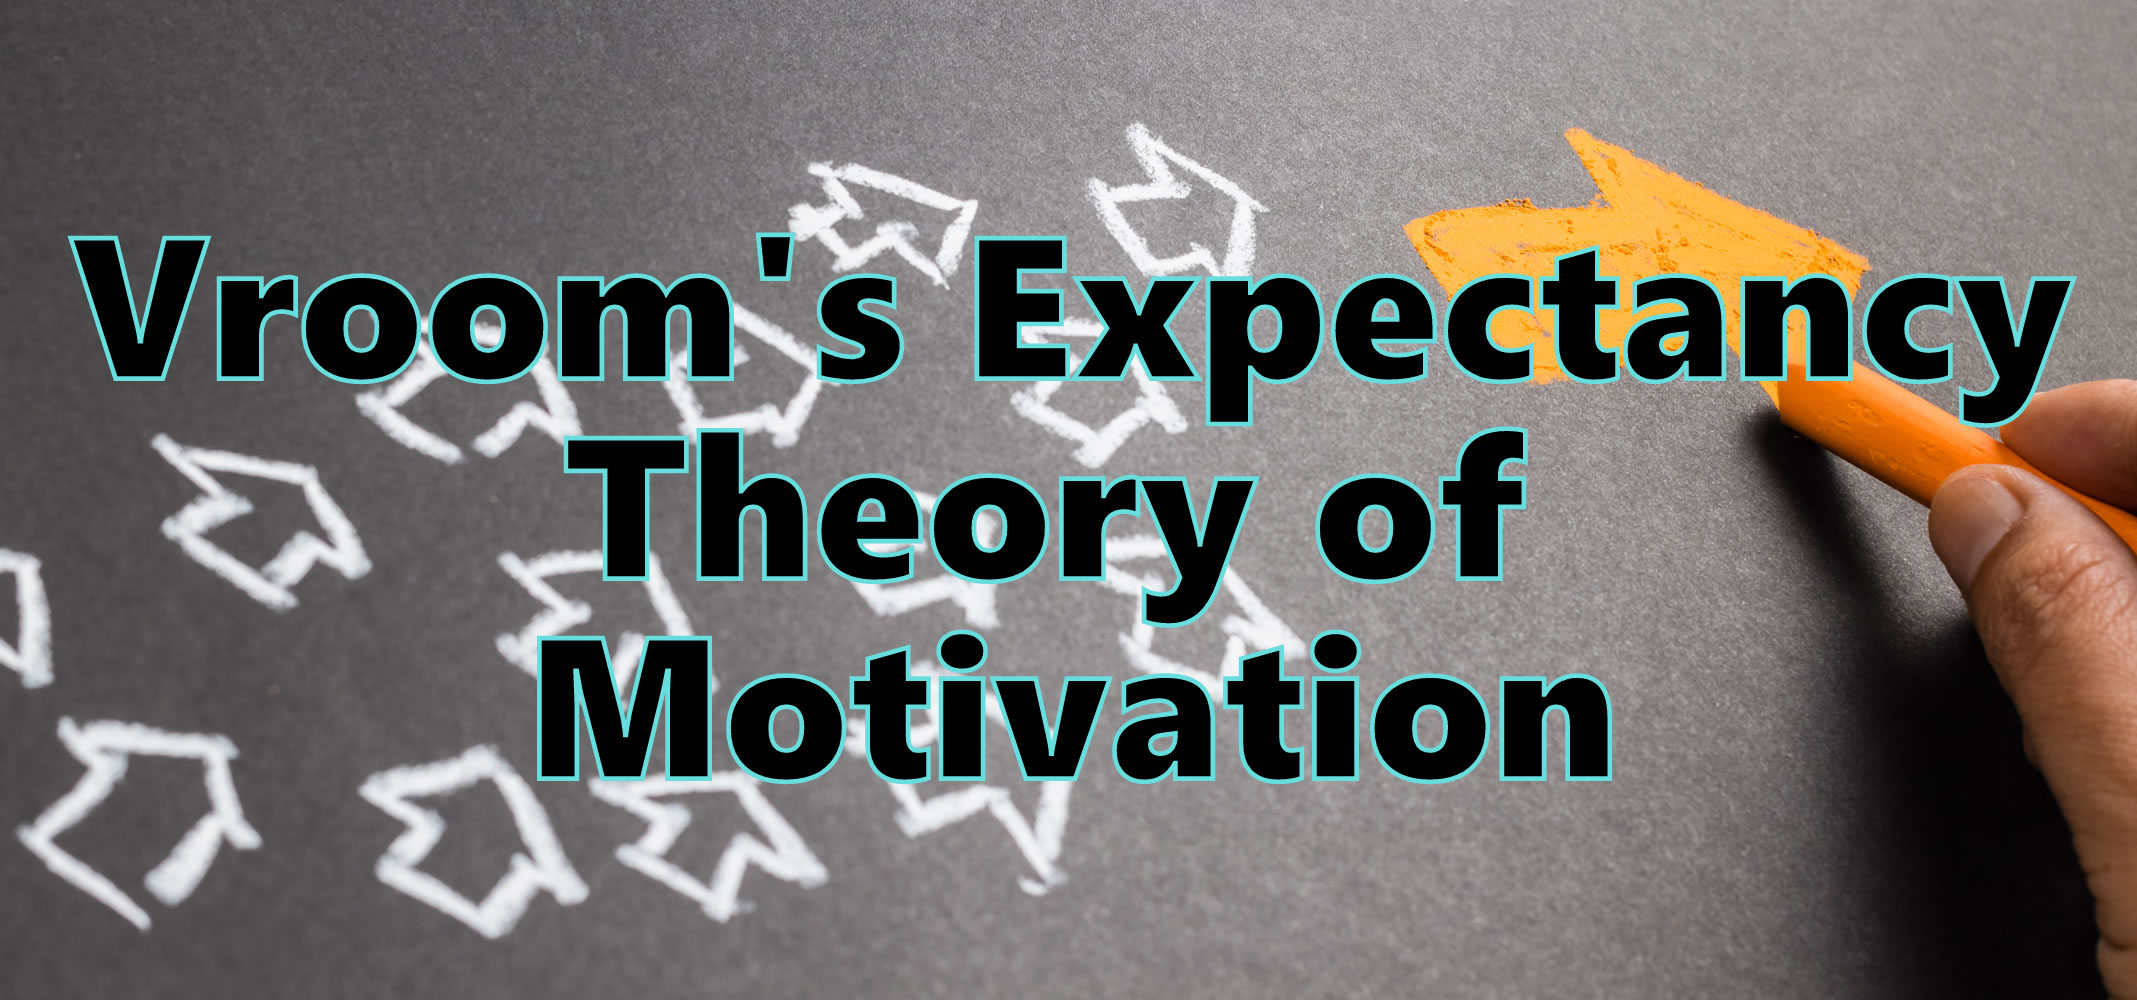 Vroom’s Expectancy Theory of Motivation